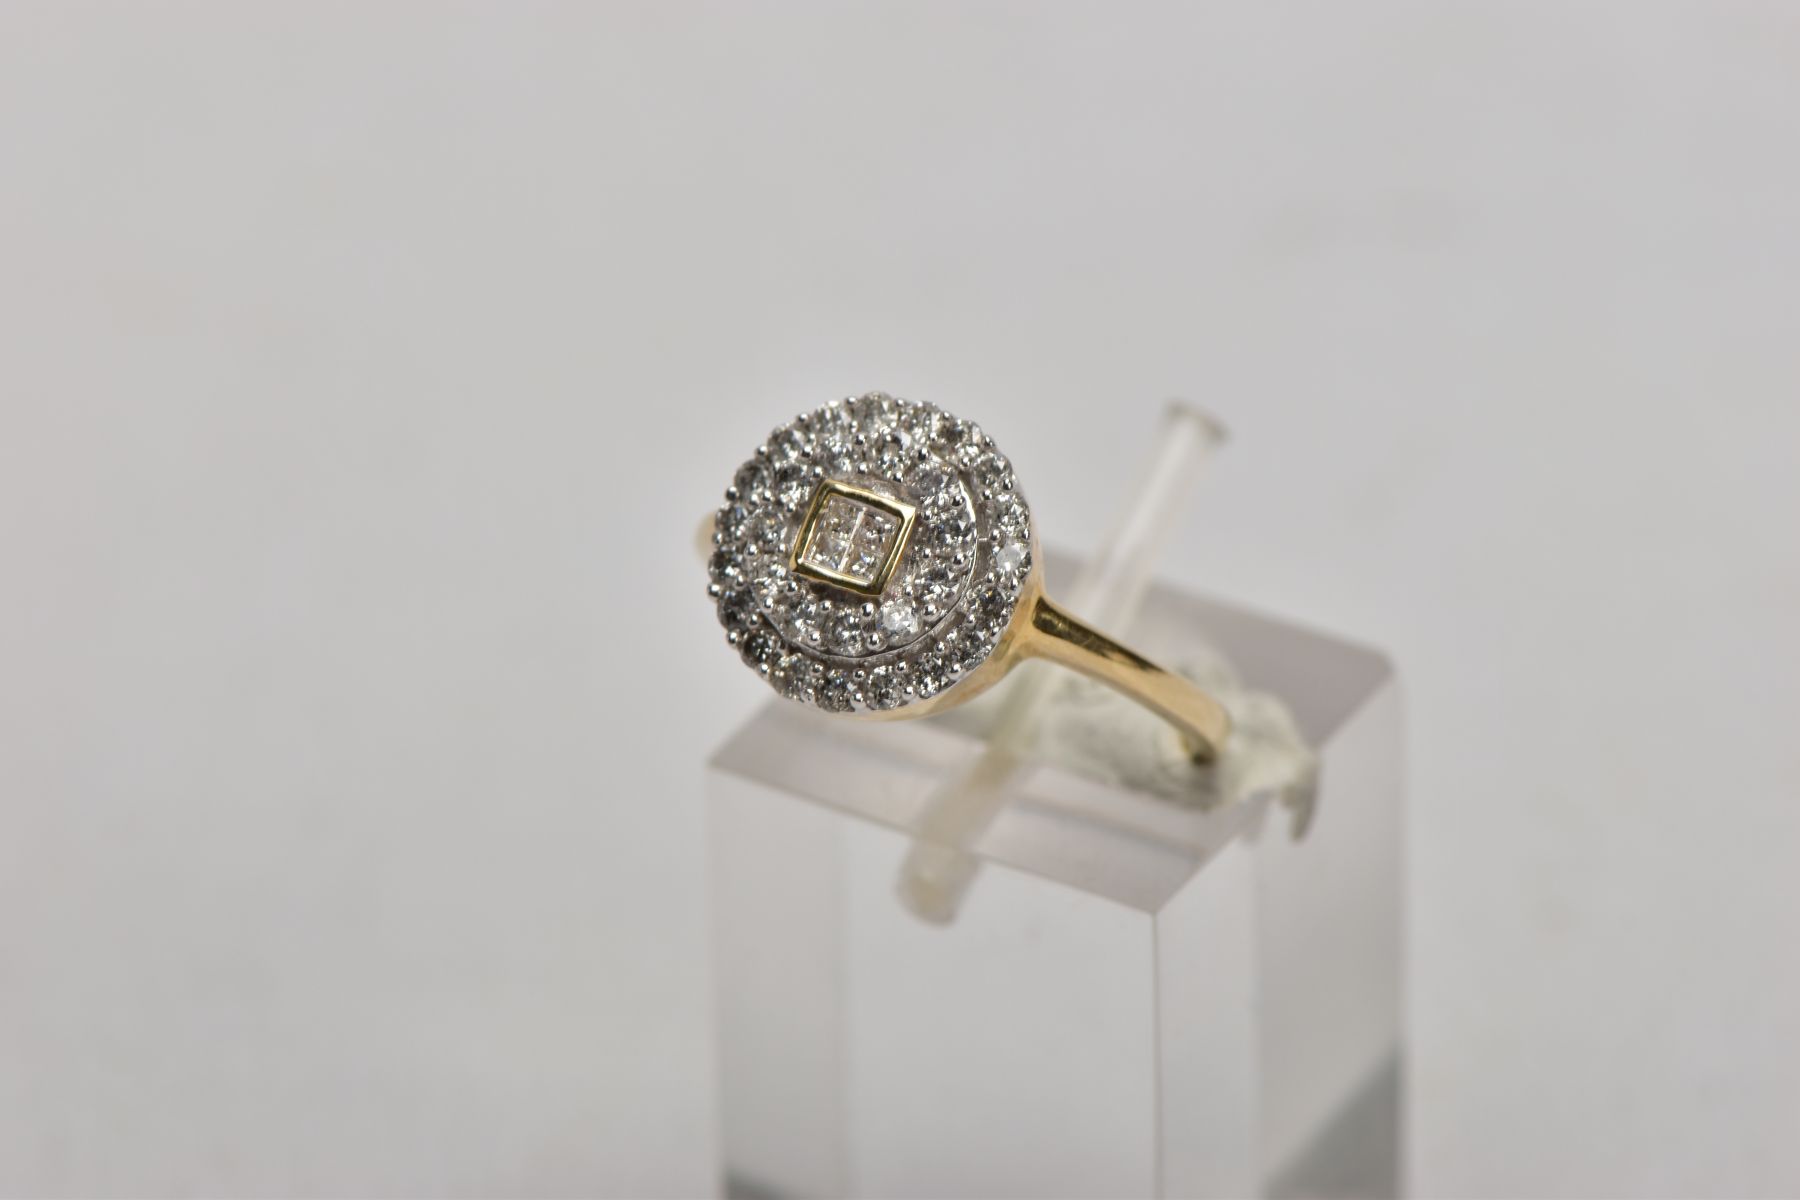 A 9CT GOLD DIAMOND CLUSTER RING, of a circular design, the central part set with four princess cut